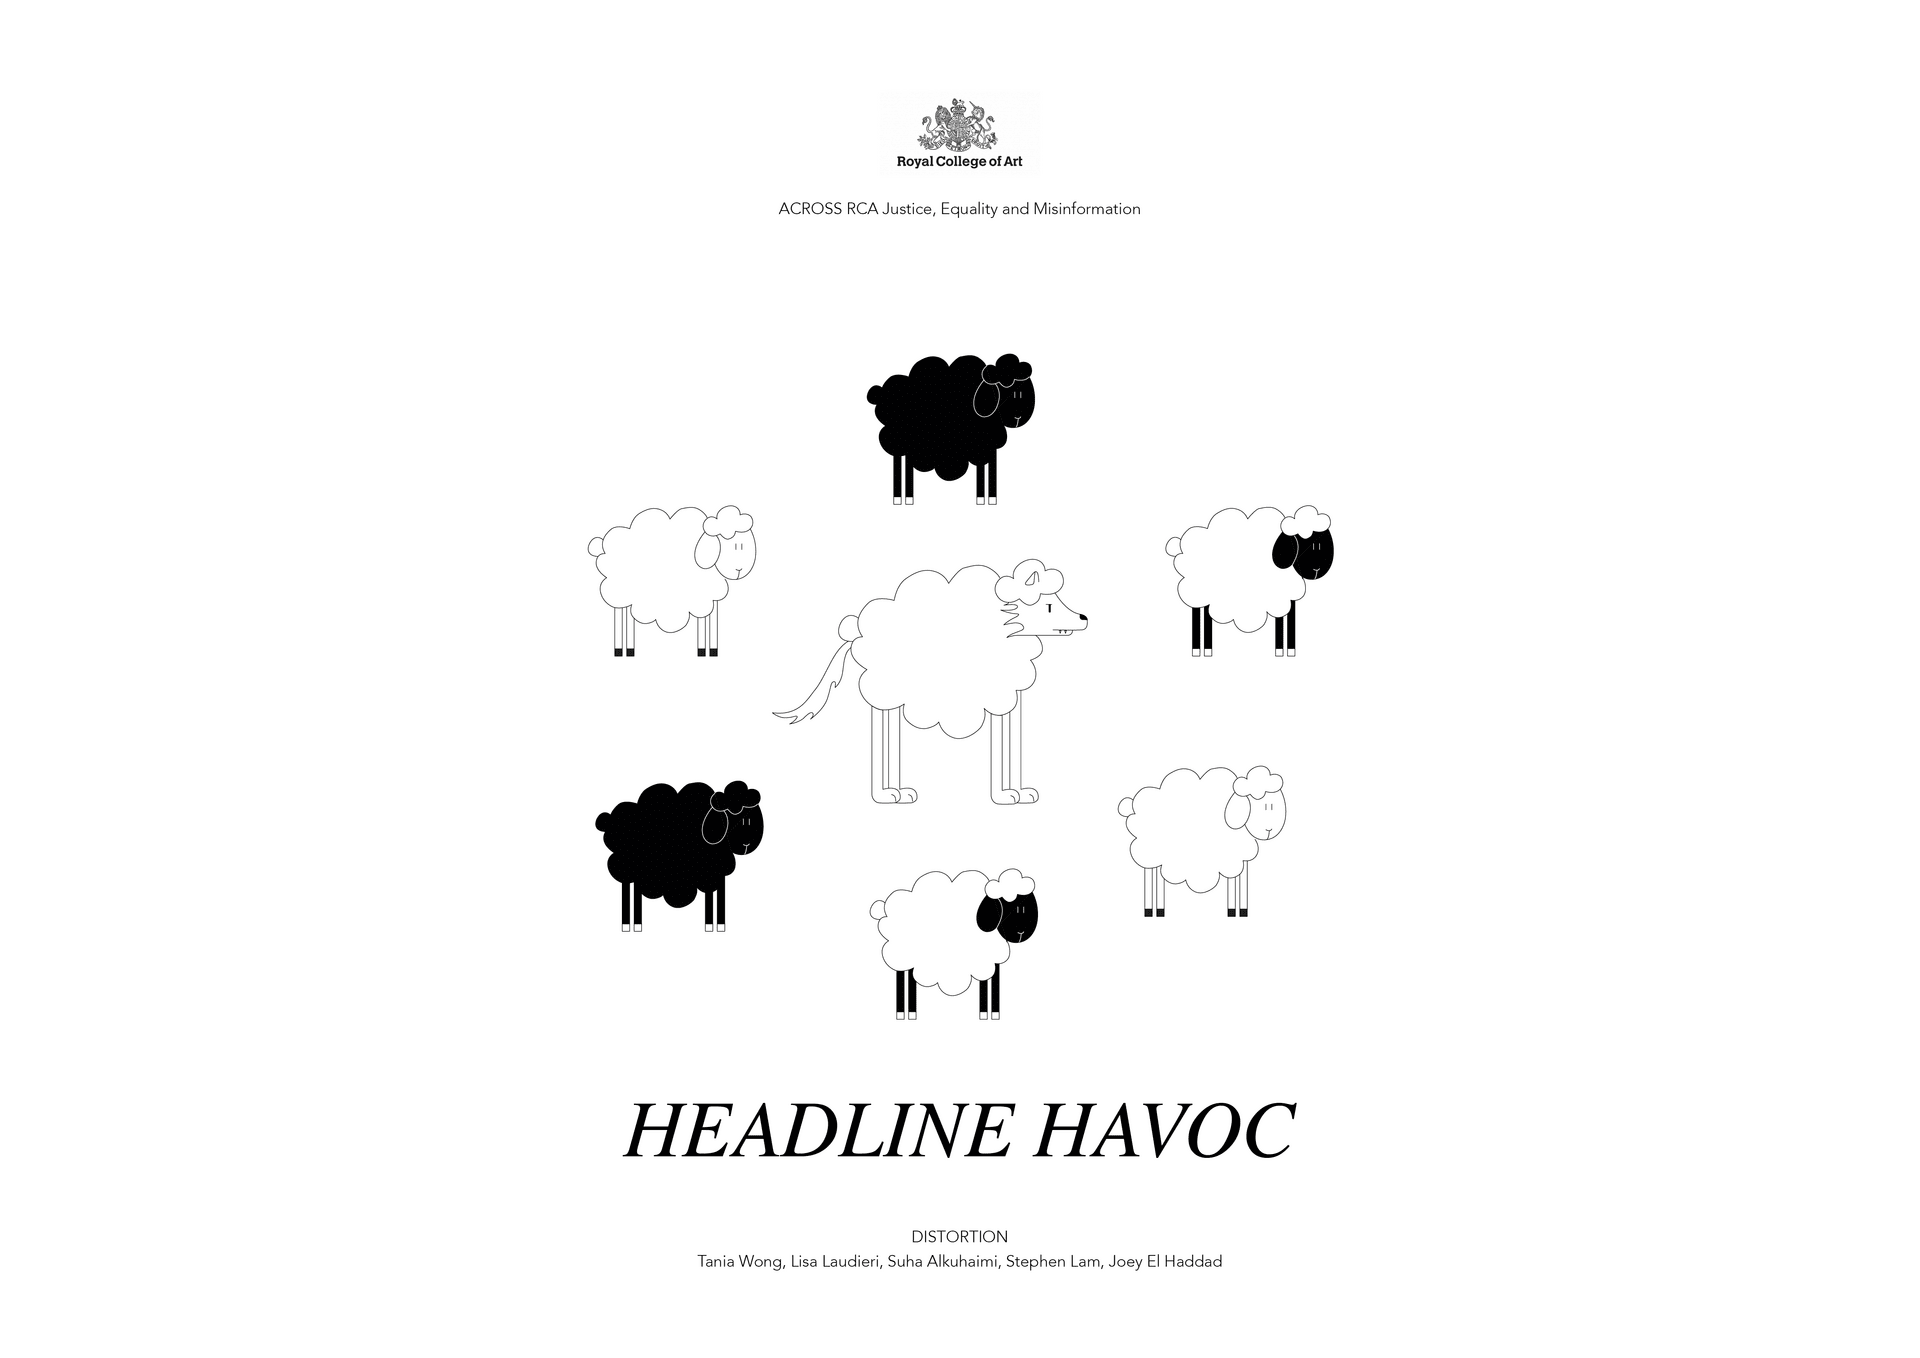 Wolf in sheepskin surrounded by a flock of sheep, Title reads "Headline Havoc"